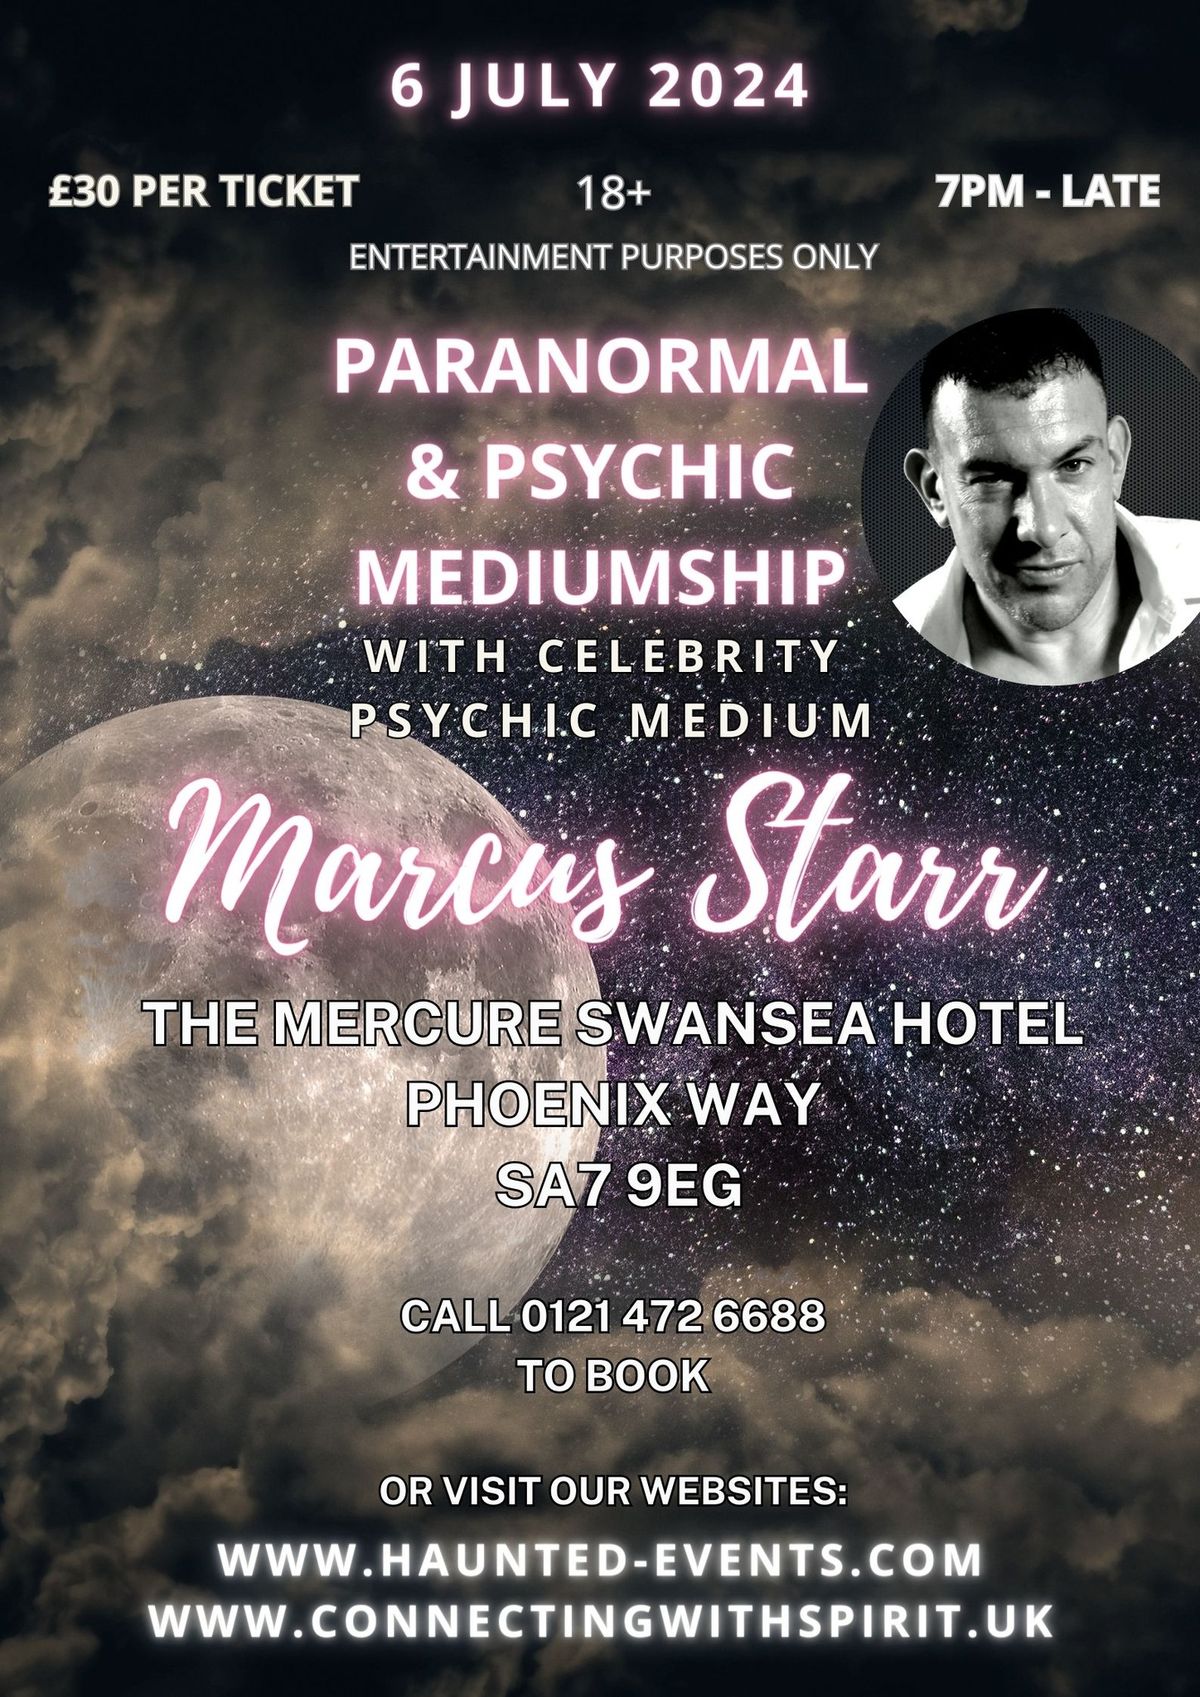 Paranormal & Psychic Event with Celebrity Psychic Marcus Starr @ Mercure Swansea Hotel